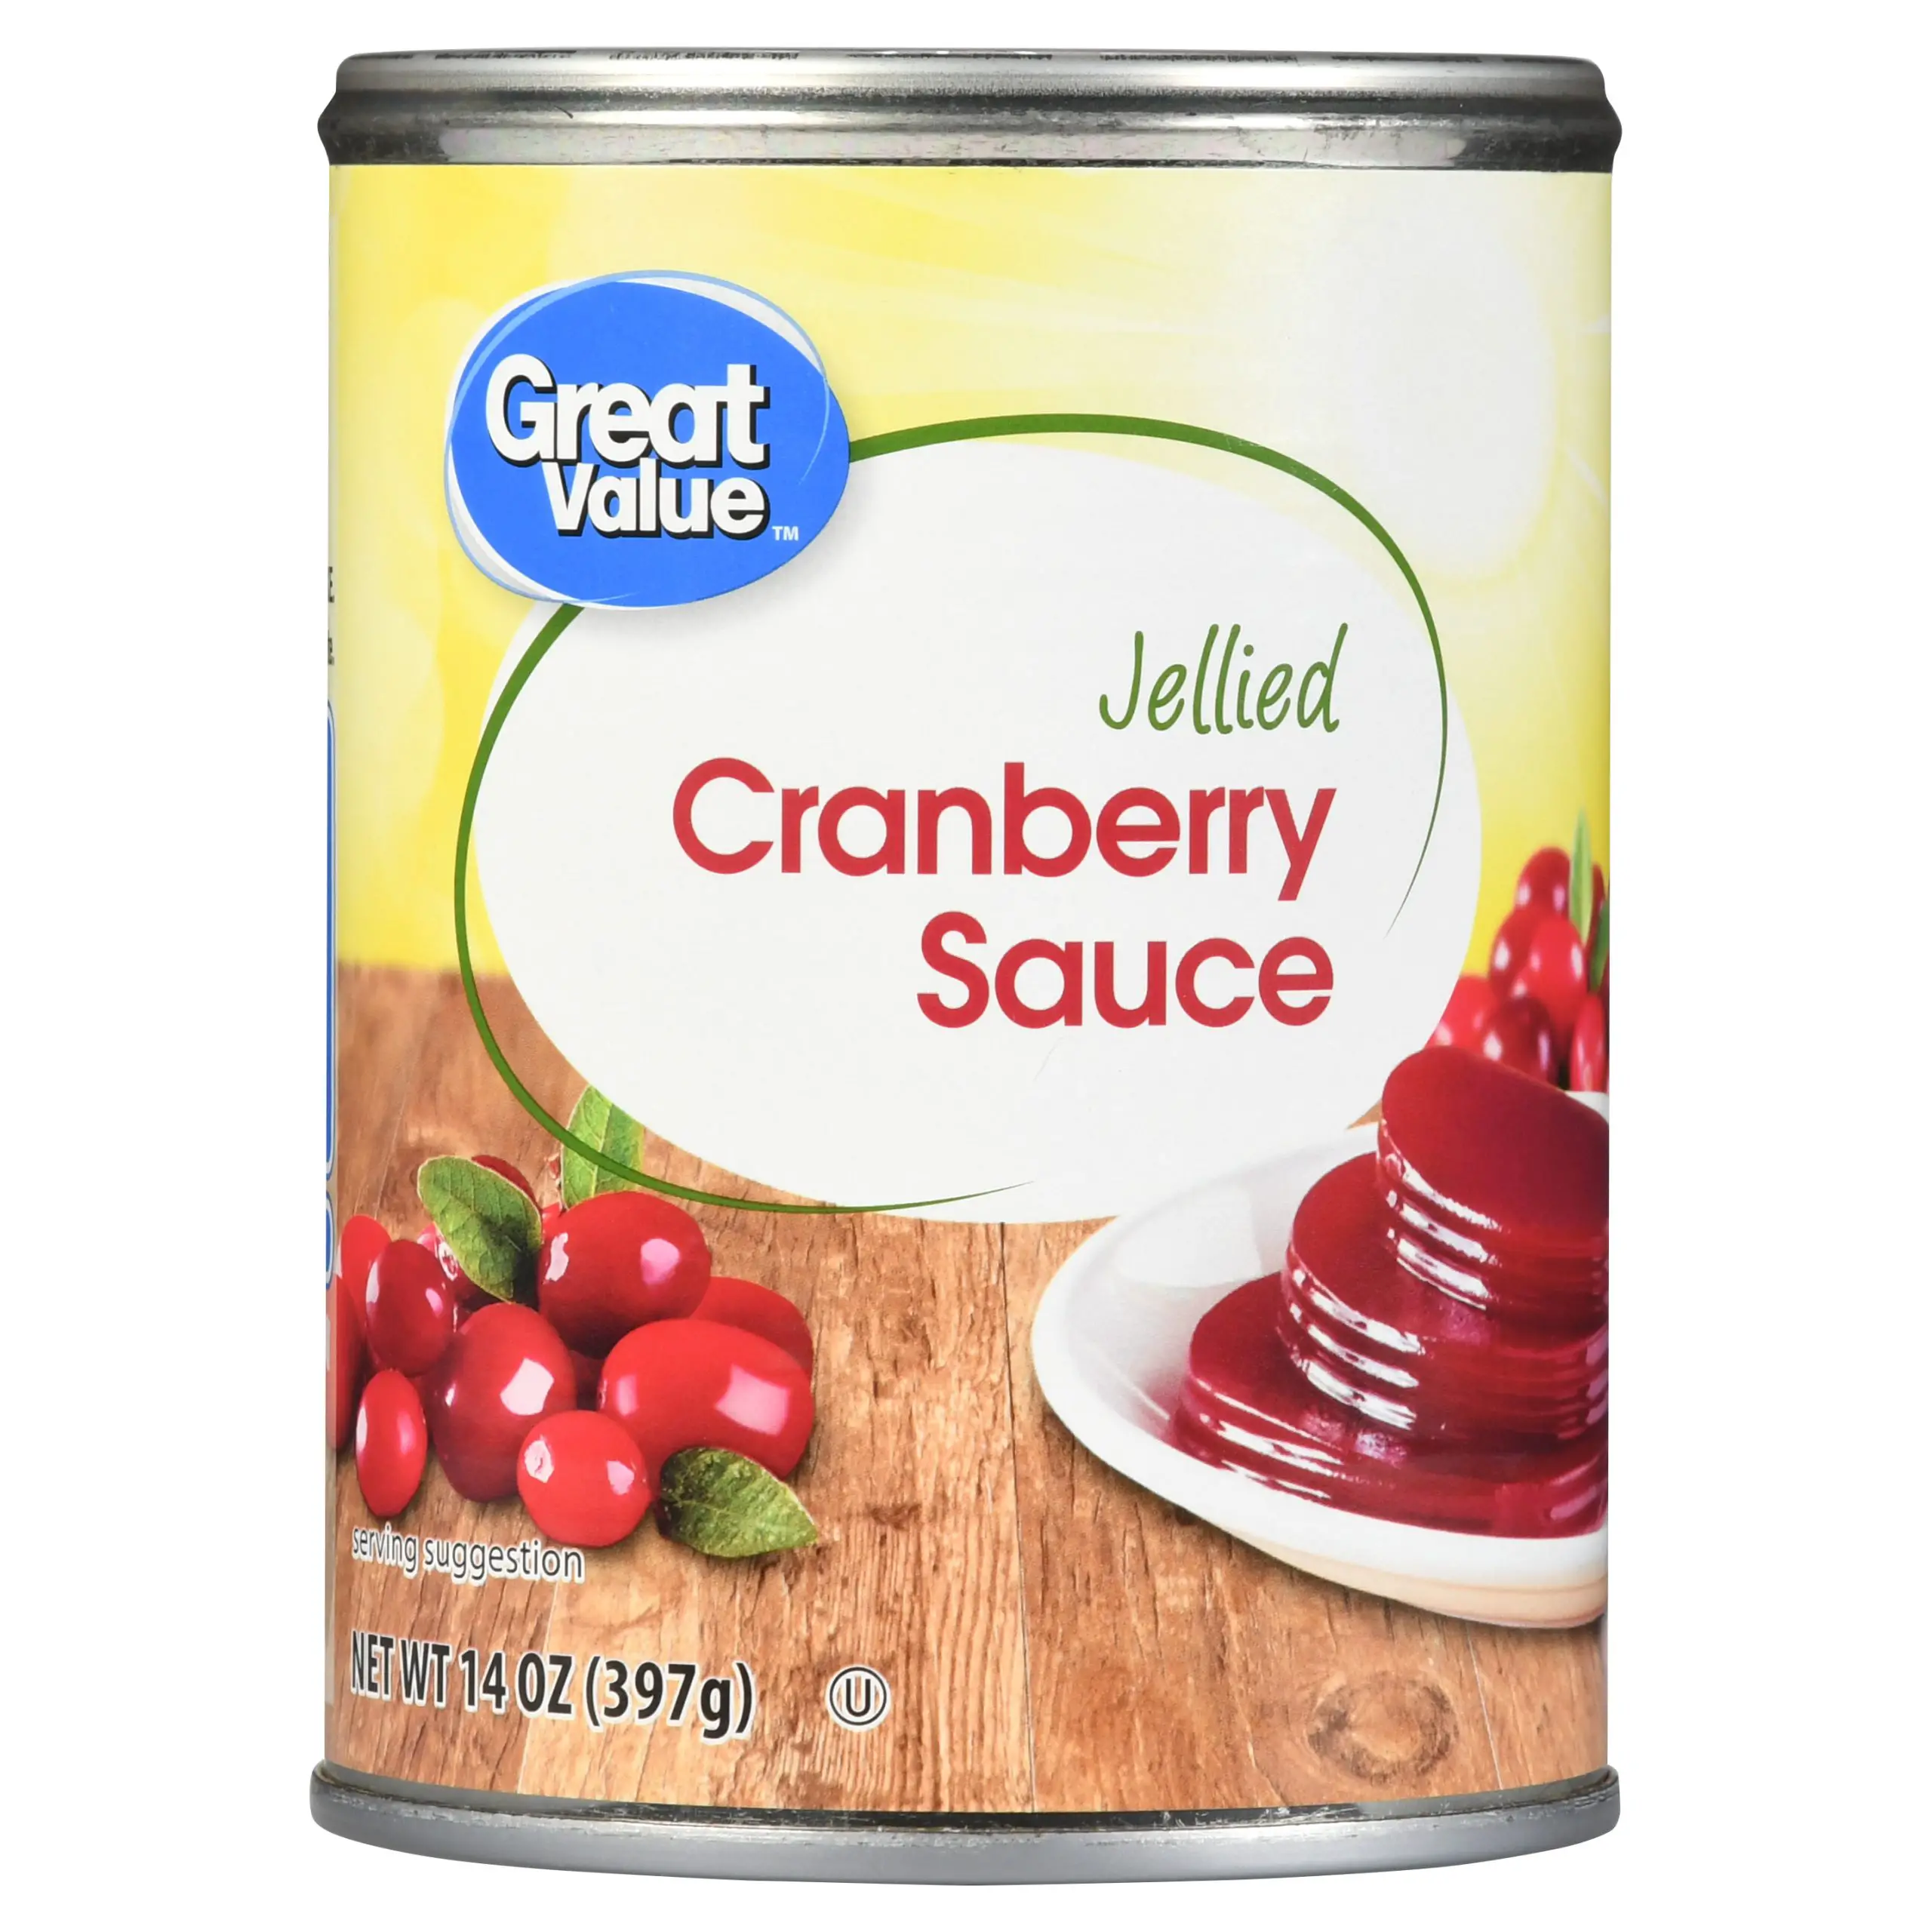 Great Value Jellied Cranberry Sauce, 4 Pack